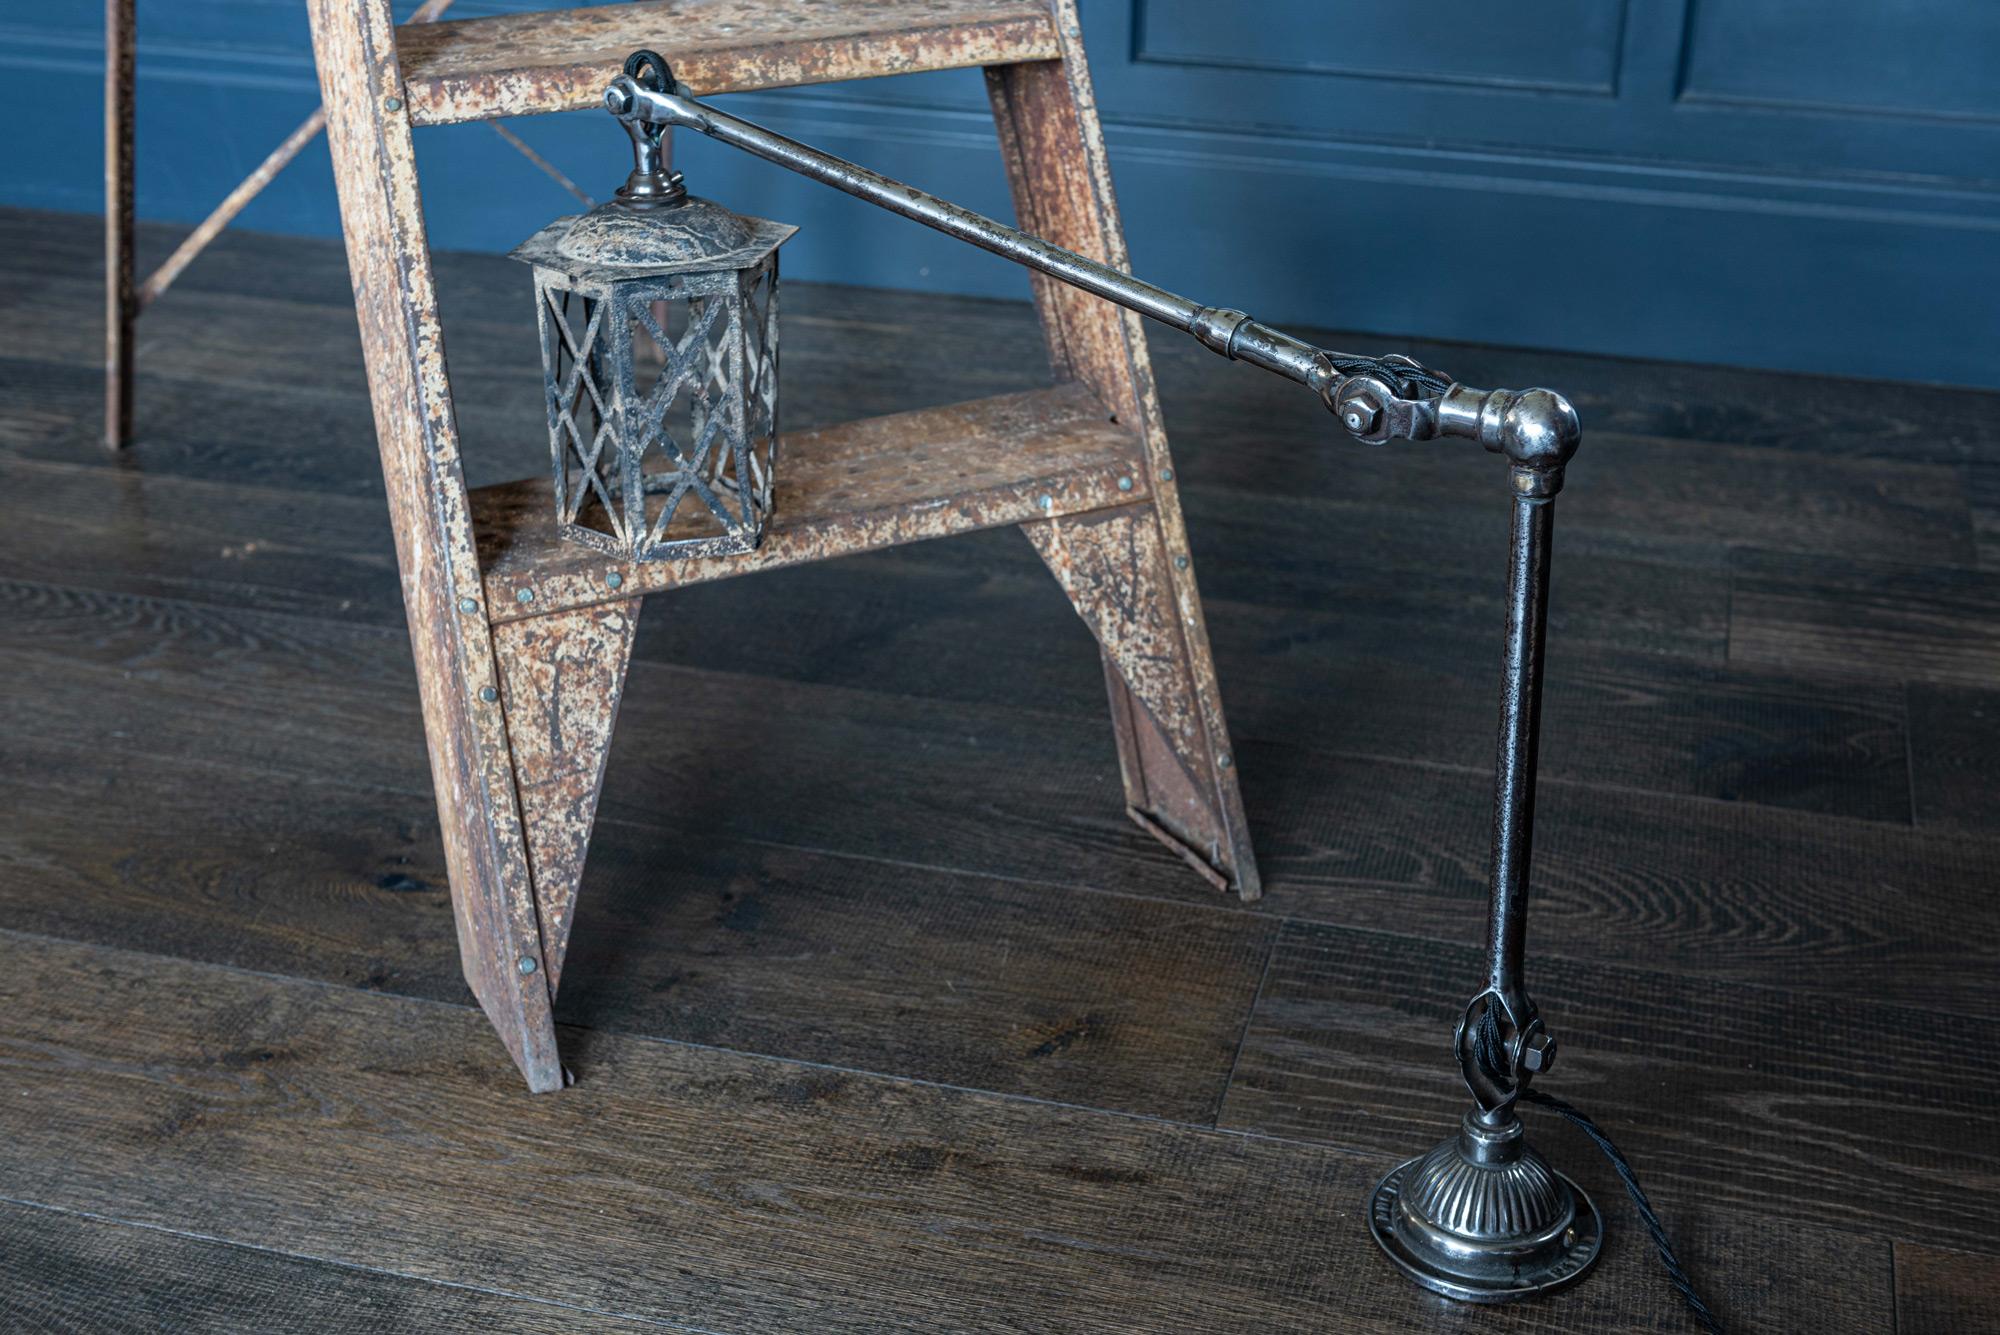 Dugdills polished Anglepoise lantern lamp, circa 1920
Makers stamp to base; ‘Dugdills Patent’. An unusual example with a fragile lattice lantern shade. Showing splits and creases but does not detract from the interesting form, aged patina and